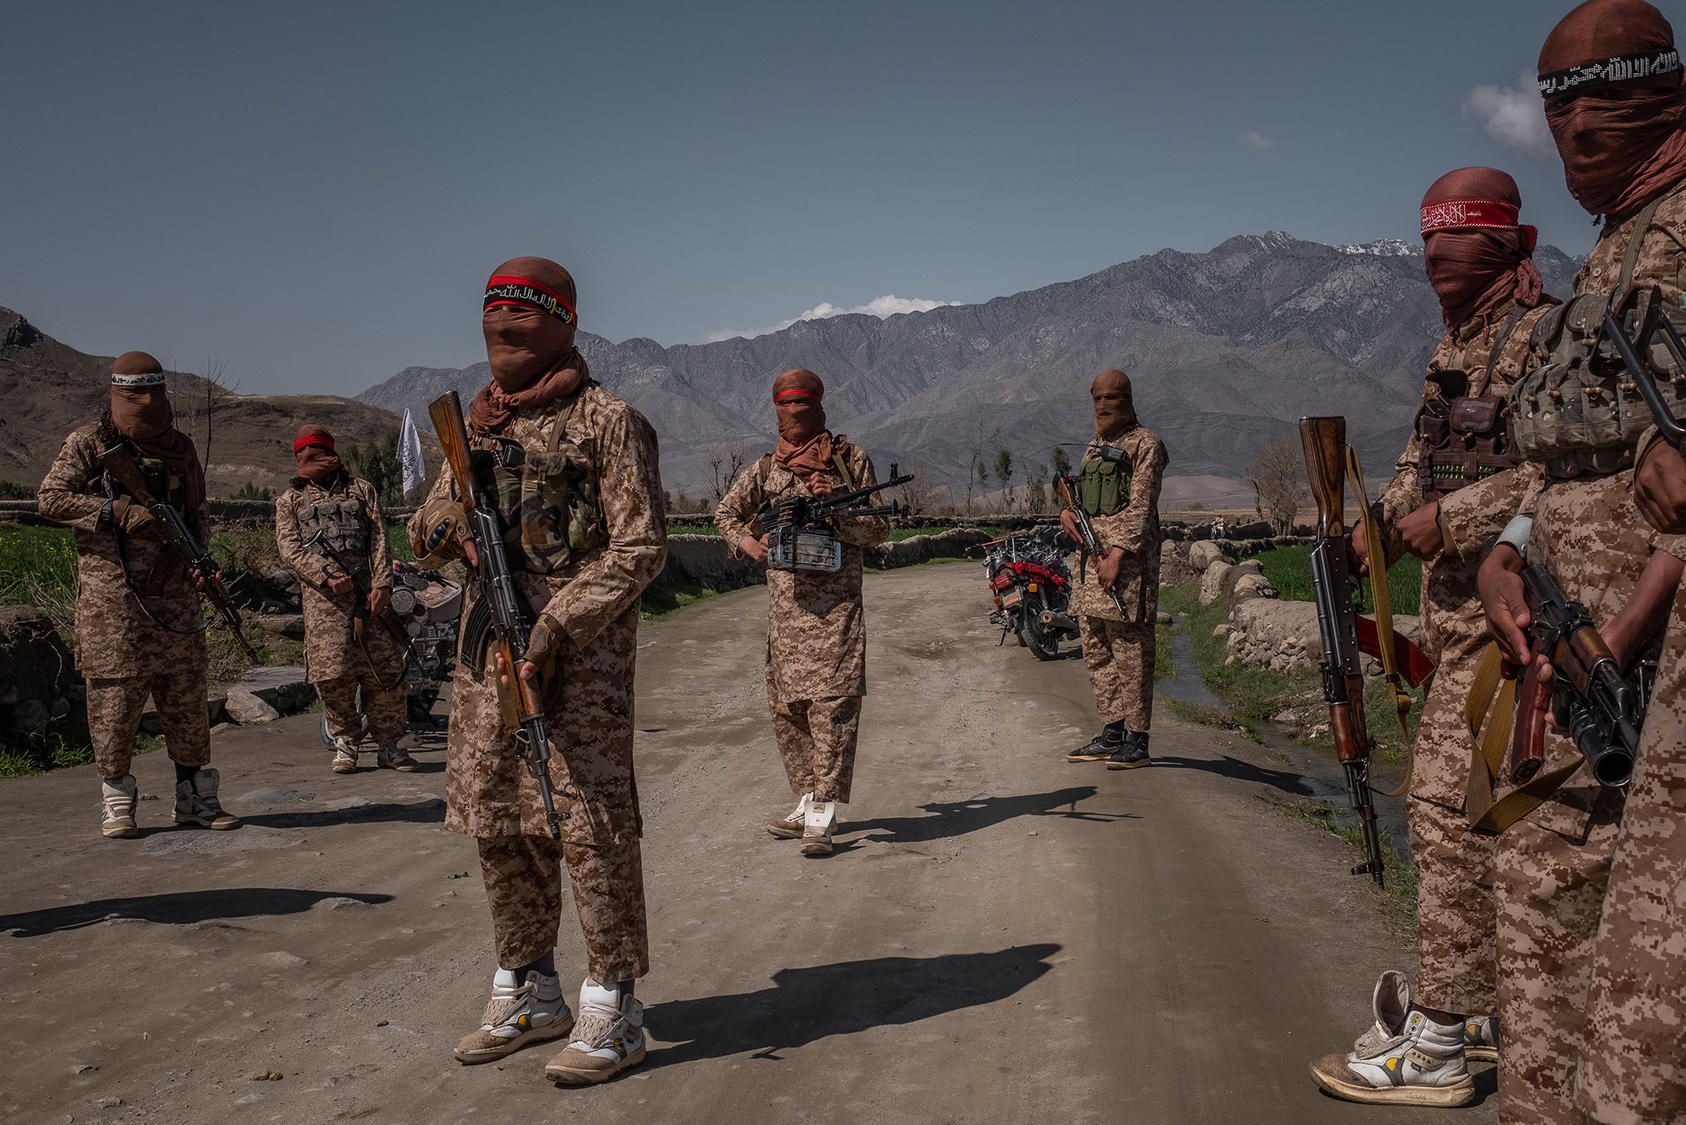 Members of a Taliban Red Unit, an elite force, in the Alingar District of Laghman Province in Afghanistan, March 13, 2020. (Jim Huylebroek/The New York Times)